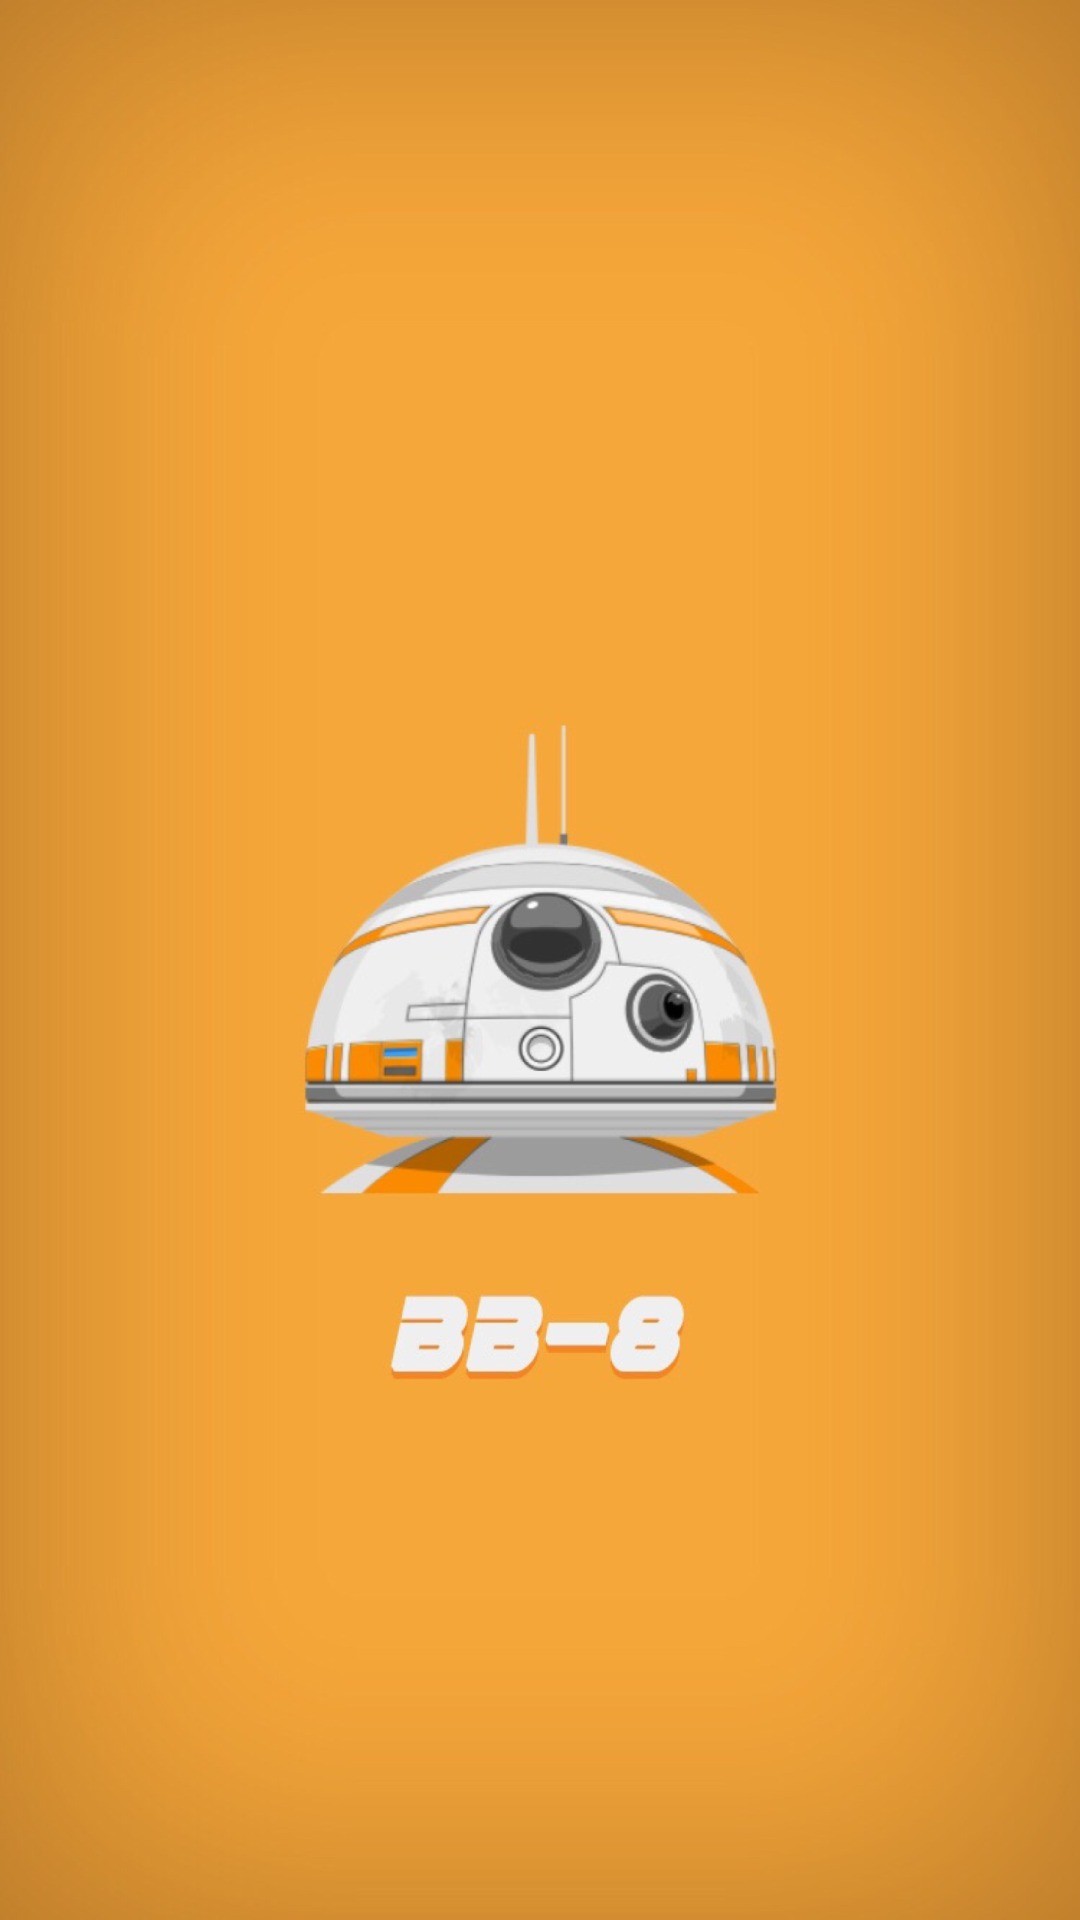 1080x1920 bb8 r2d2 star wars iphone background iphone wallpaper wallpapers iphone 6  background iphone 6 wallpaper sneple